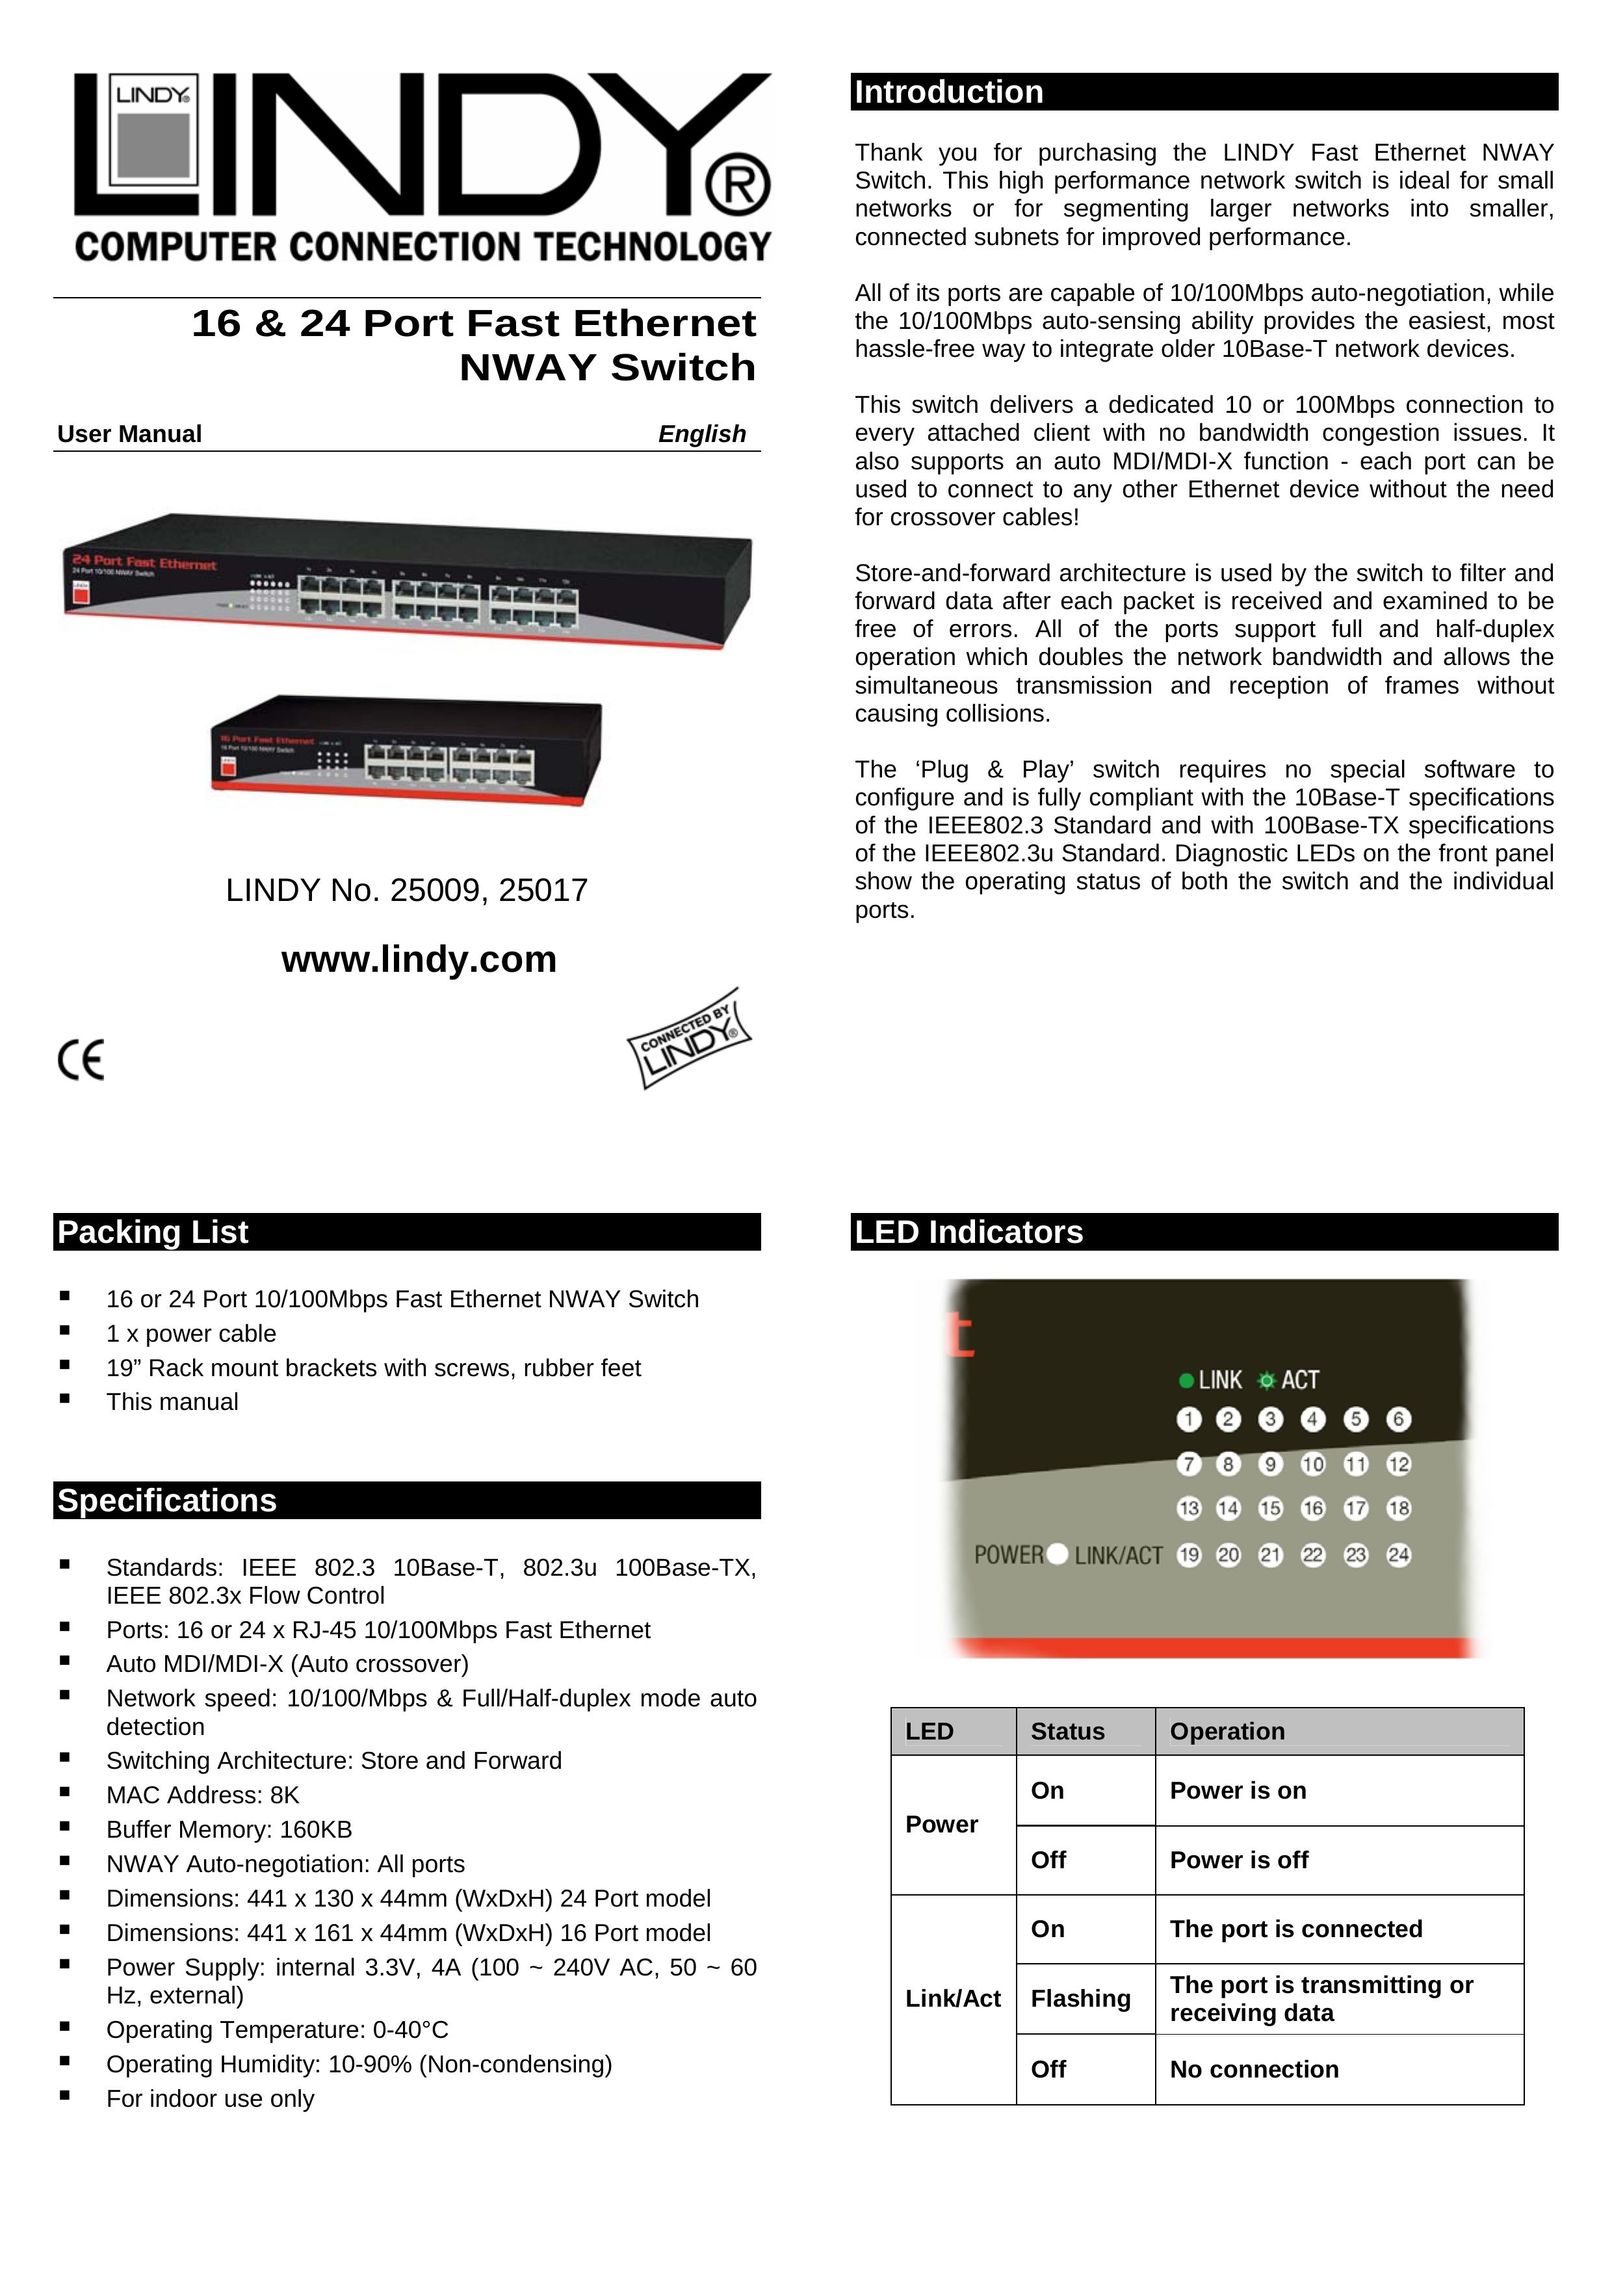 Lindy 25017 Switch User Manual